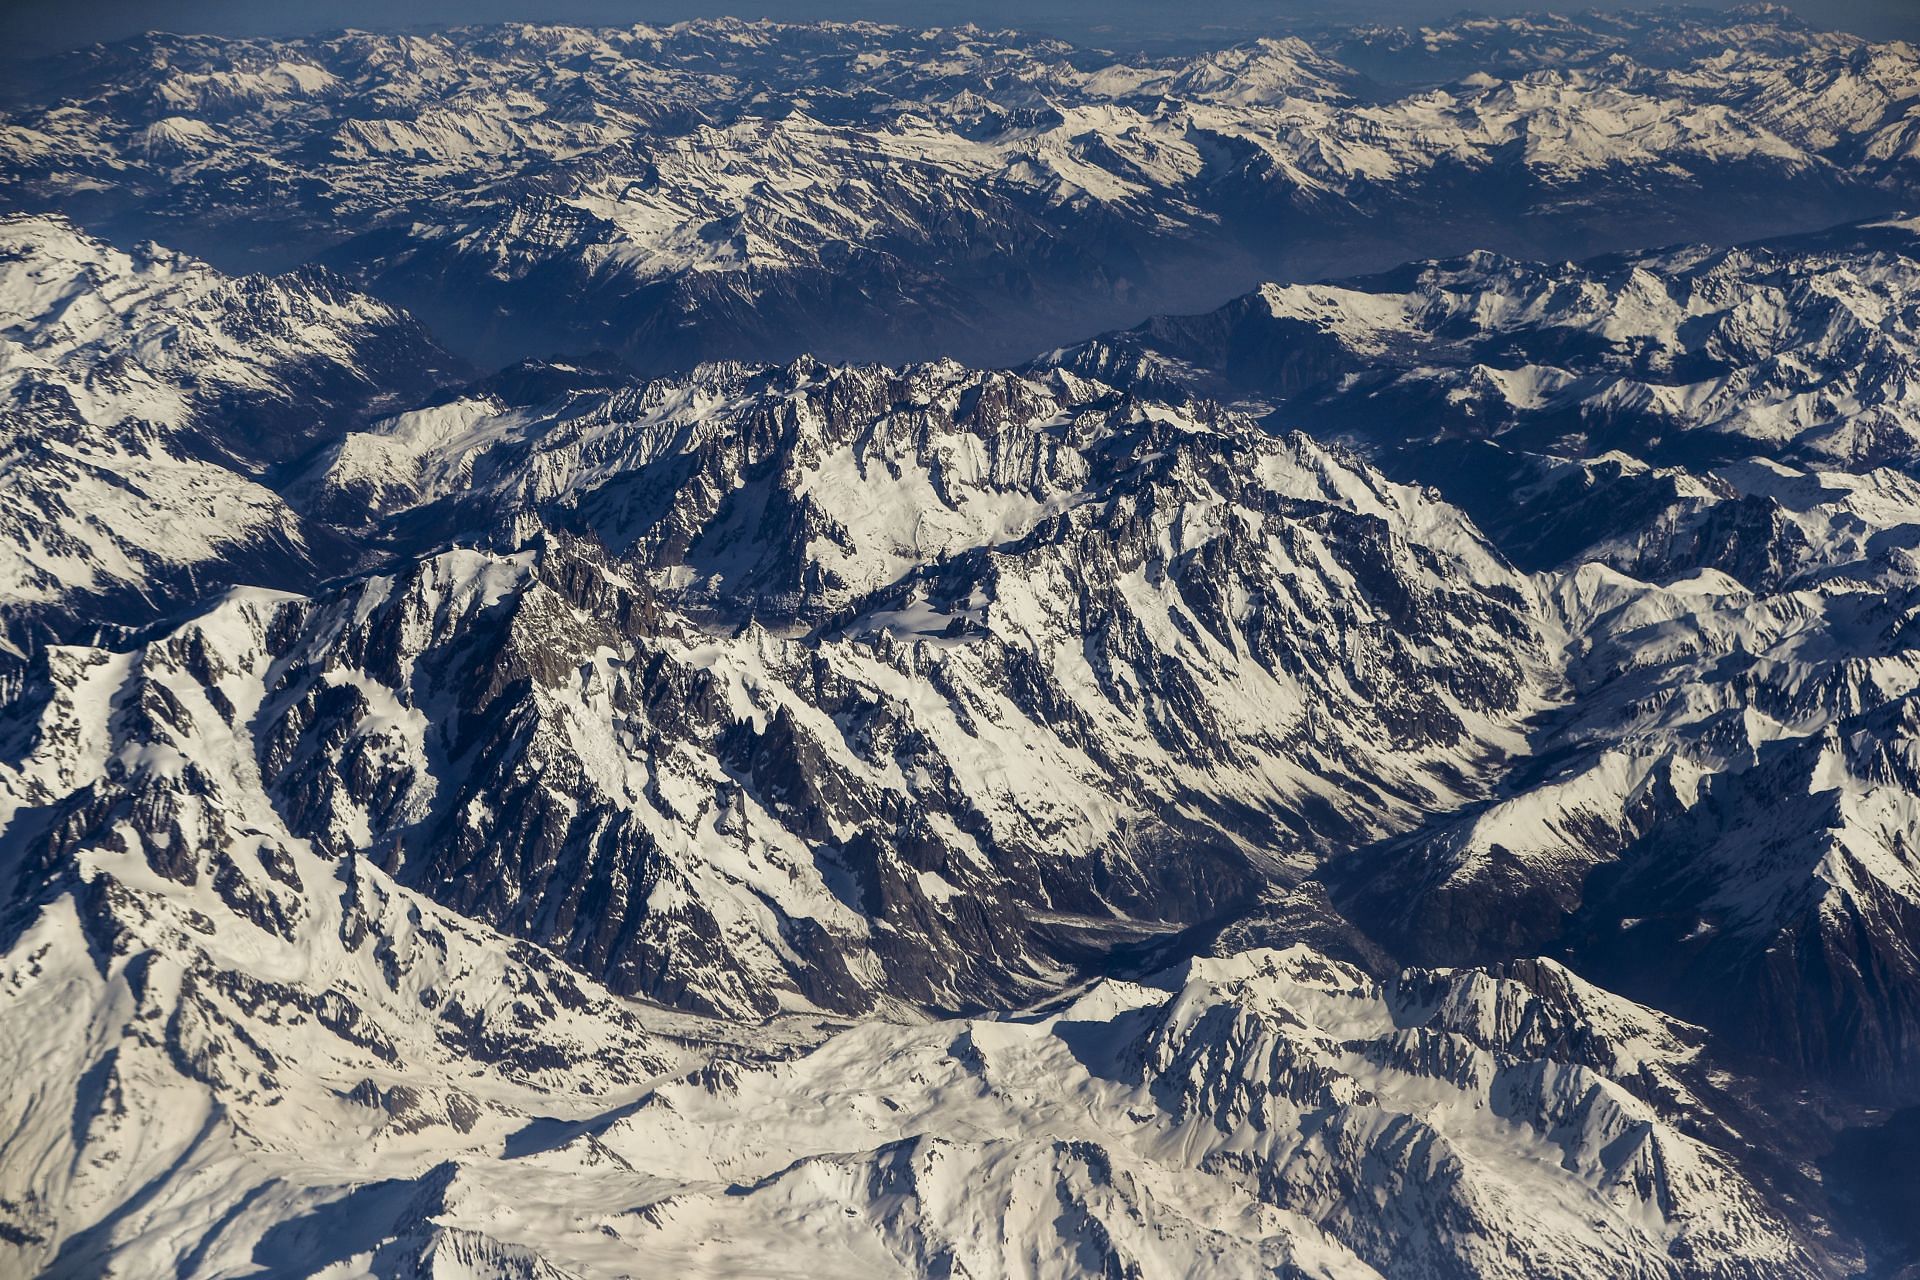 An aerial view of the Swiss Alps, where five members of the same family were found dead (Image via Getty)